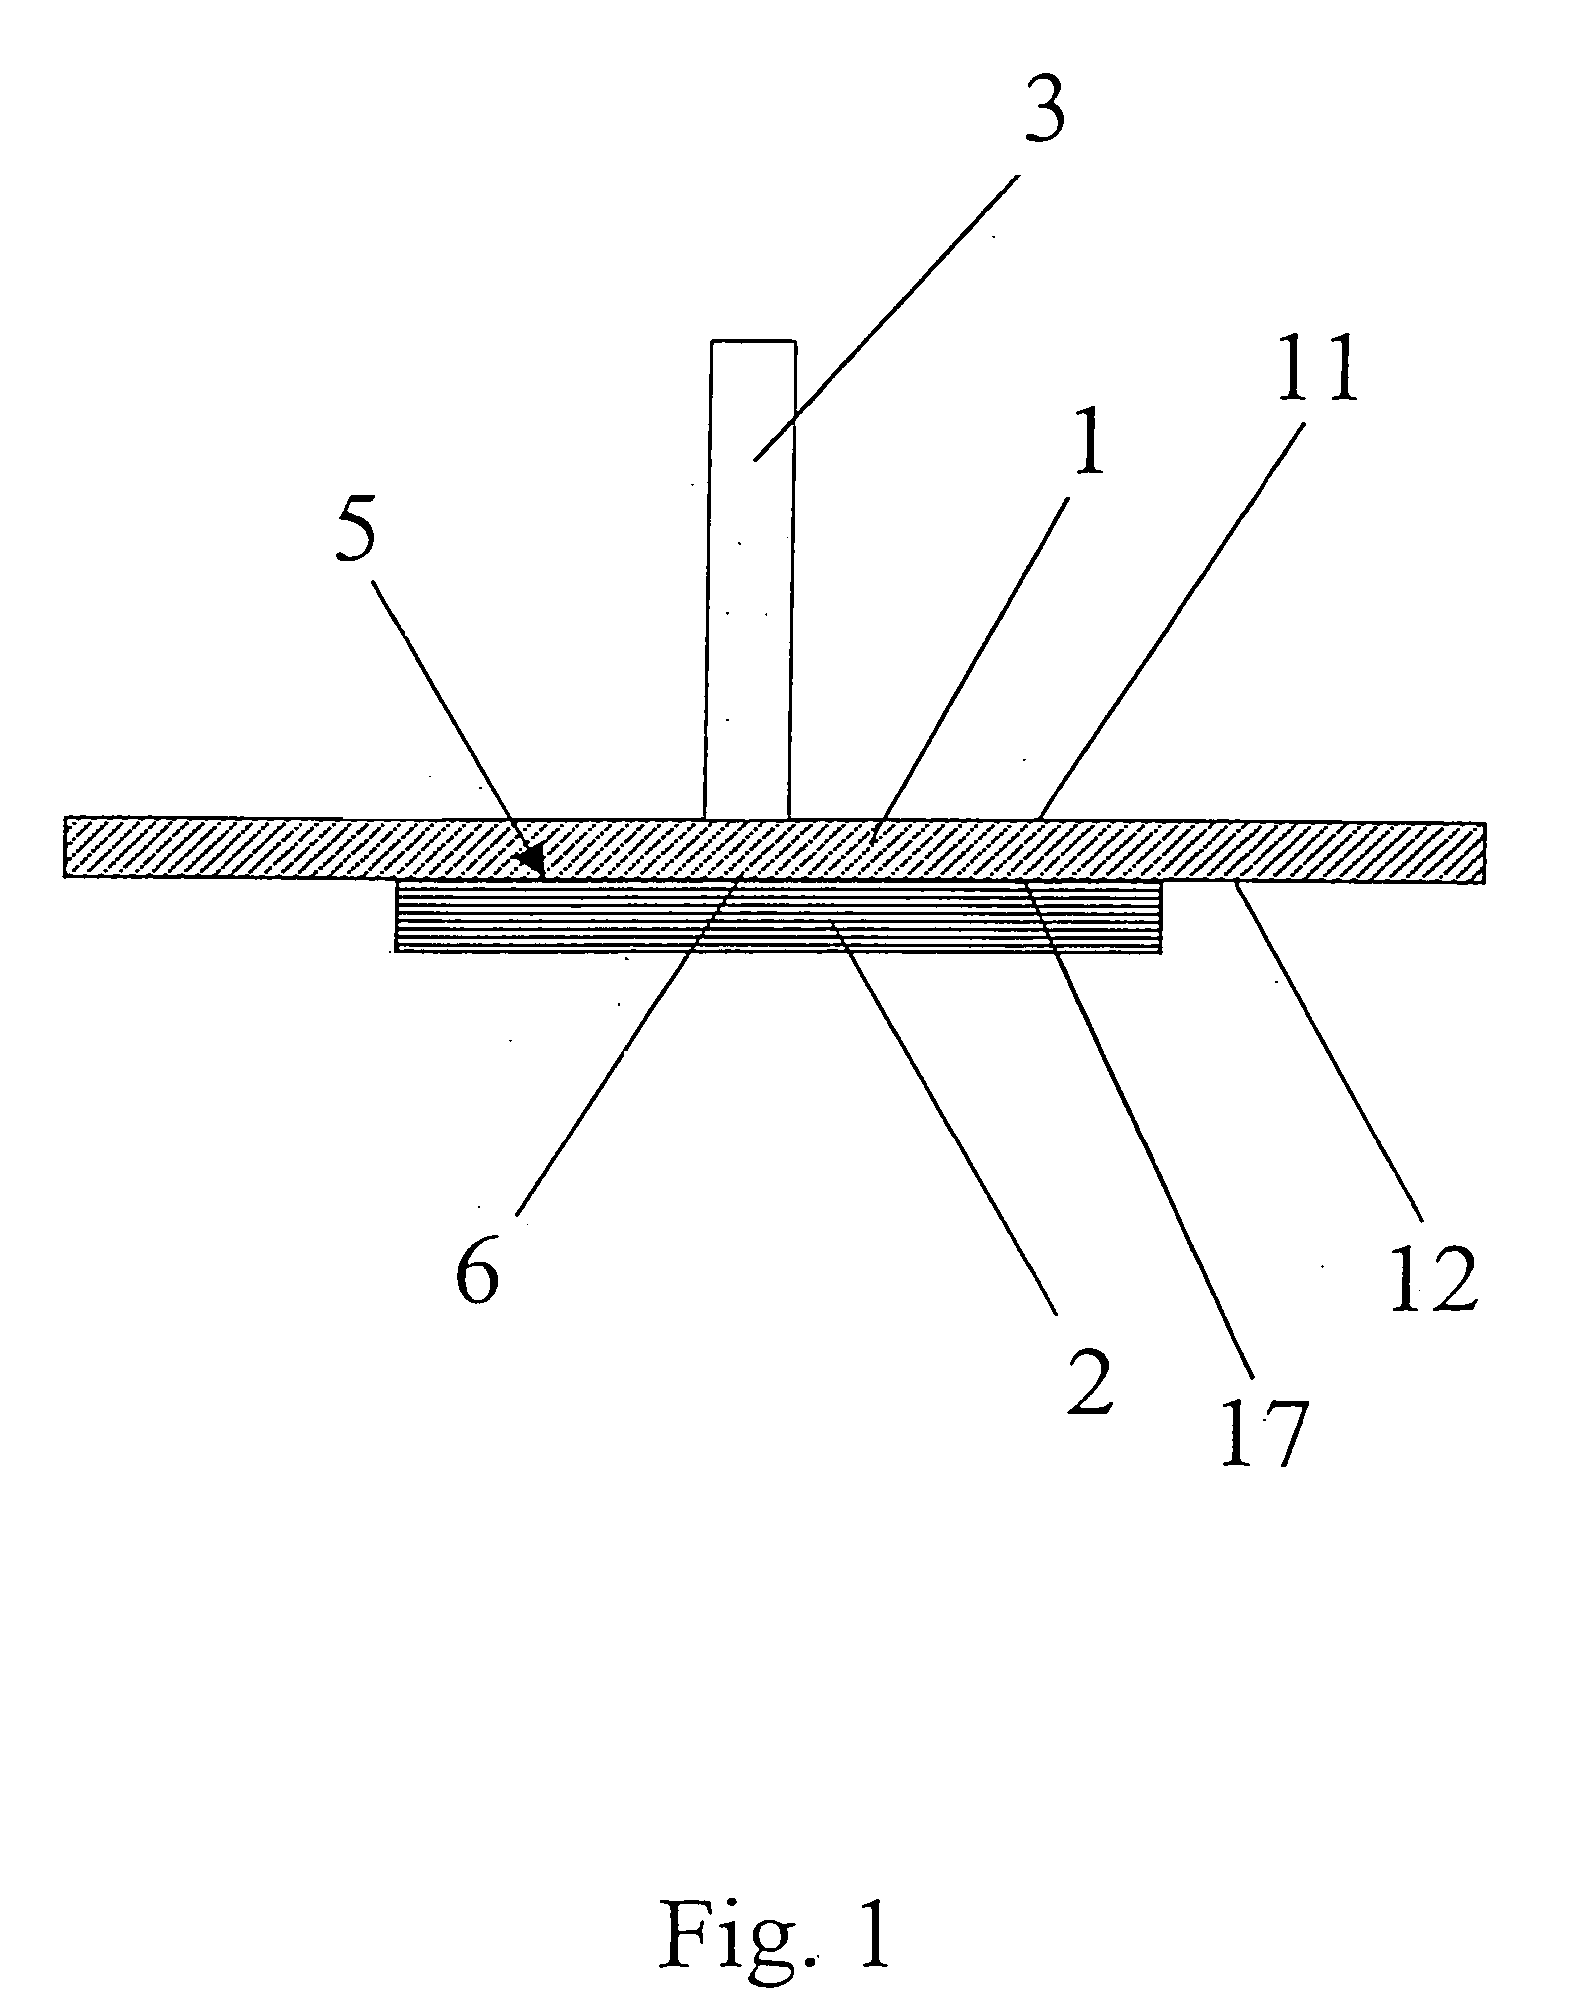 Method of connecting shaped parts made of plastics material and metal